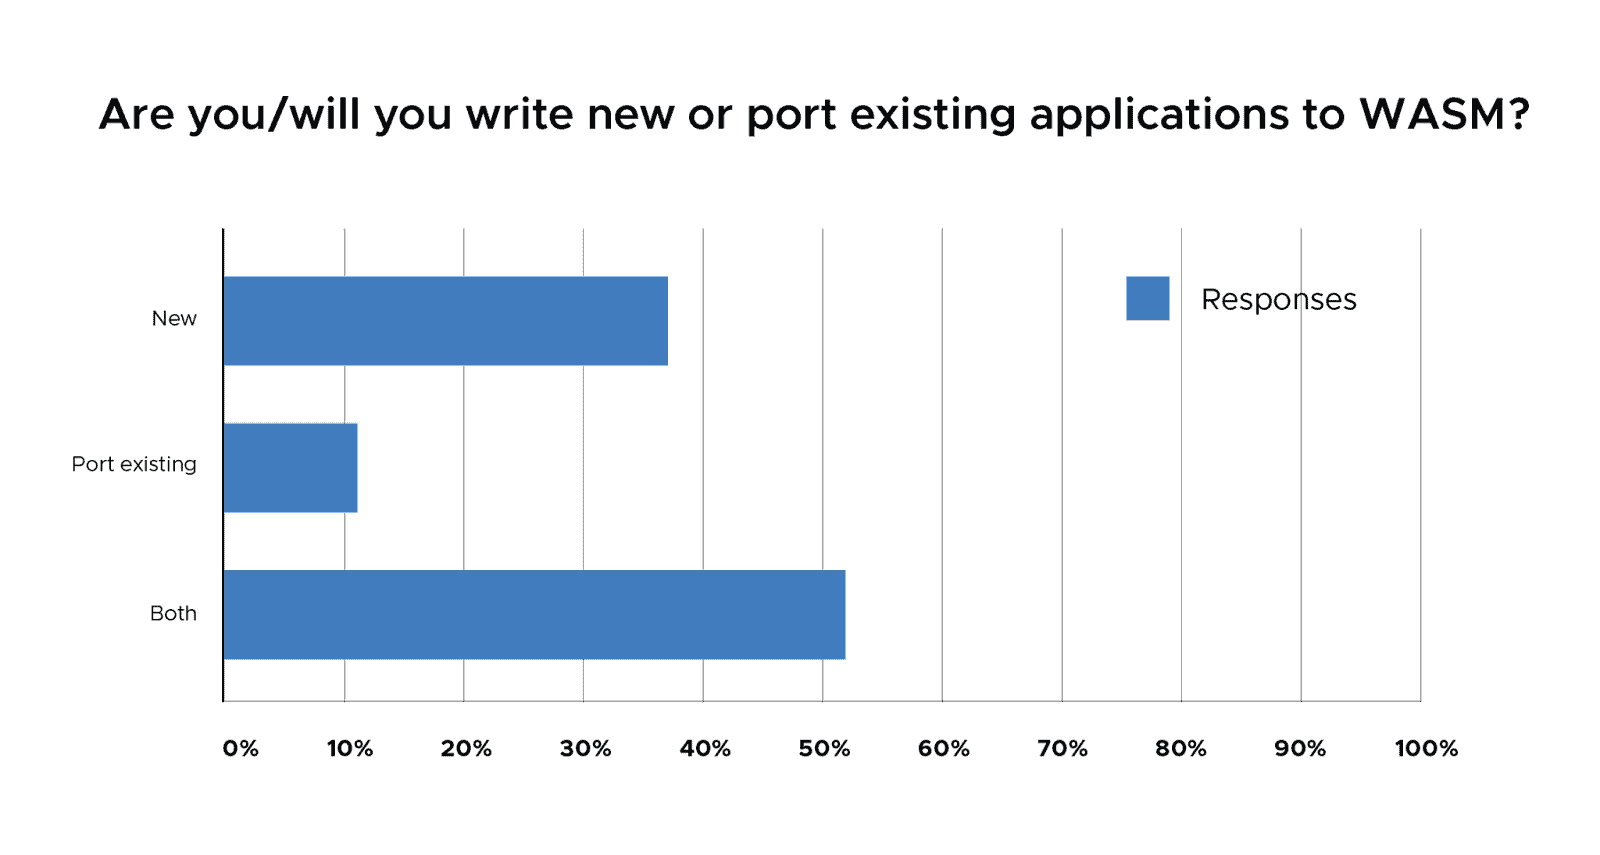 Bar chart showing most of the respondents chose to write both new and port existing applications to WASM